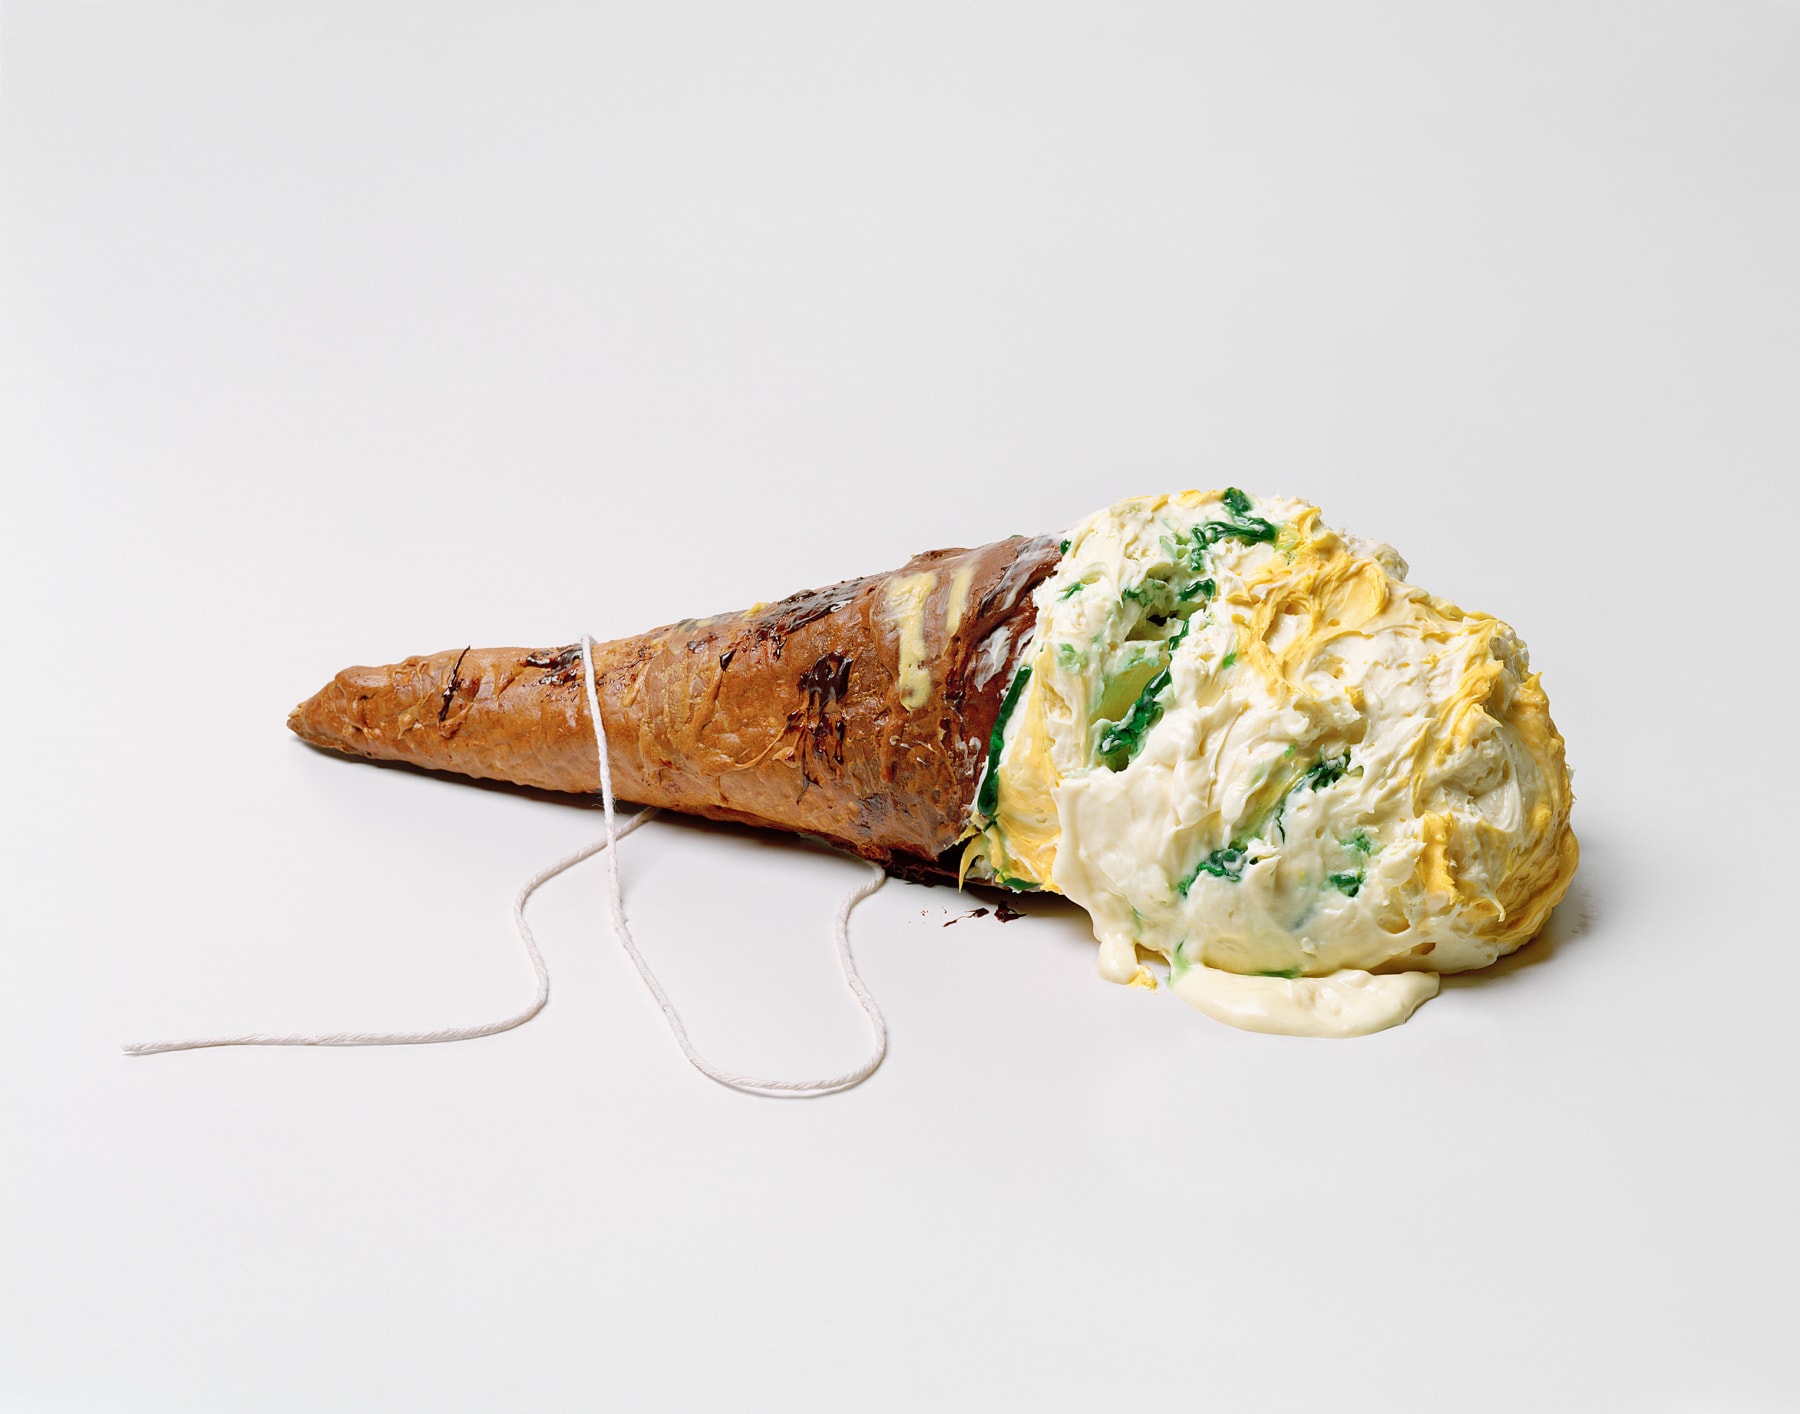 Photograph by Sharon Core. Ice cream cone lying on its side arranged to look like similar sculpture by Claes Oldenburg.